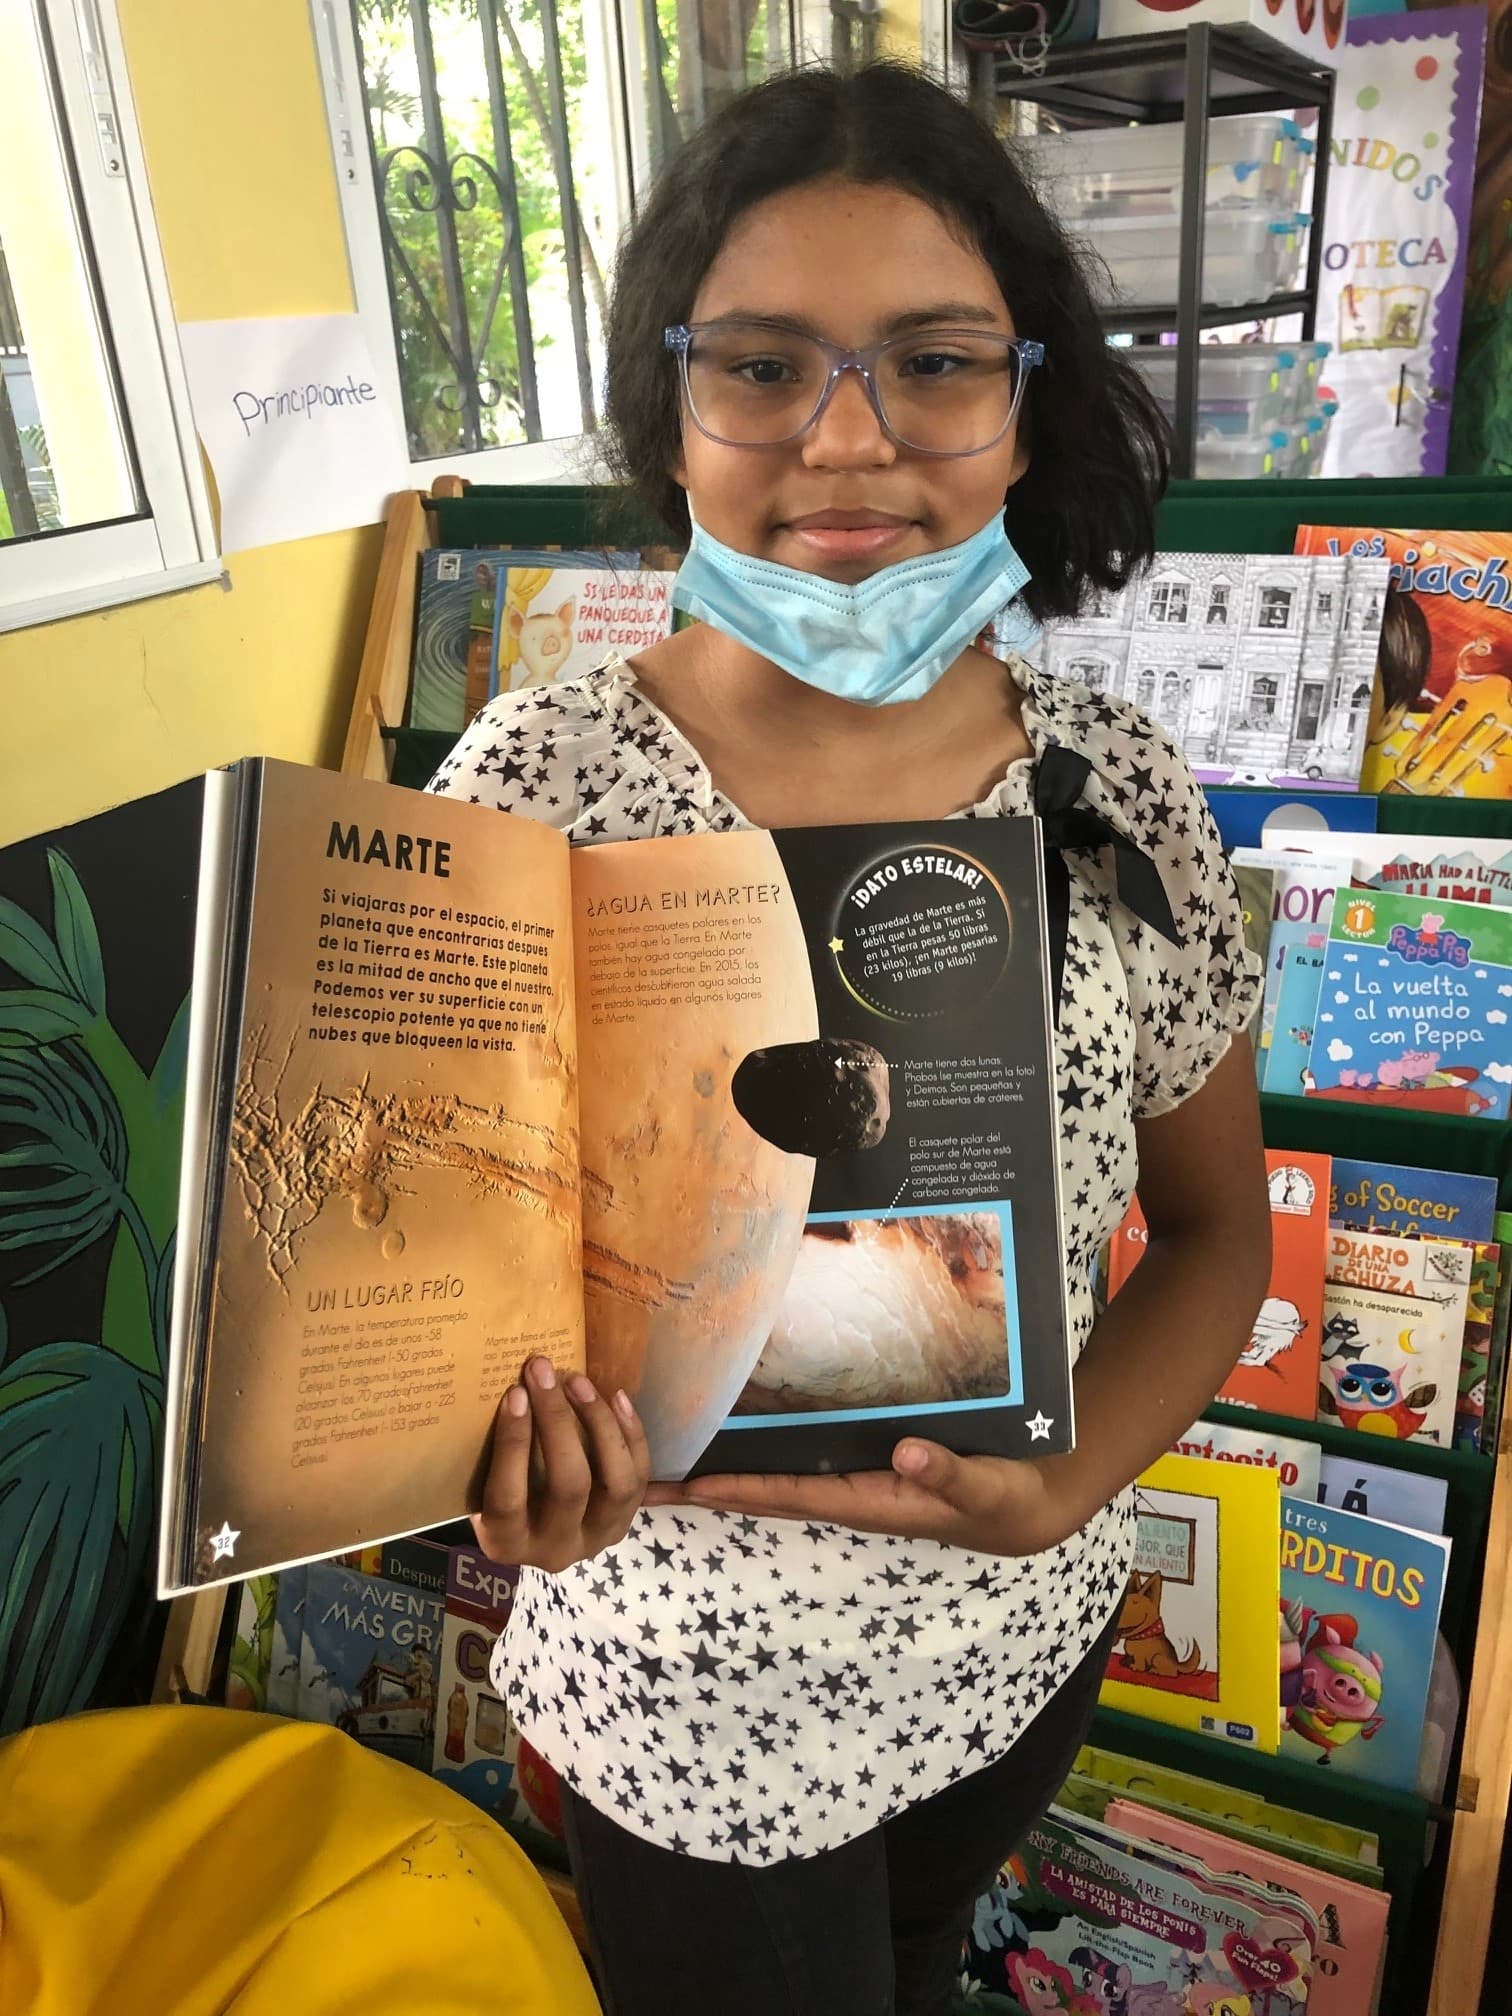 11-year-old Nasaret Pereira says she did not read much before the library came to her school since she does not have books at home.  (Karyn Miller-Medzon / Here & amp; Now)